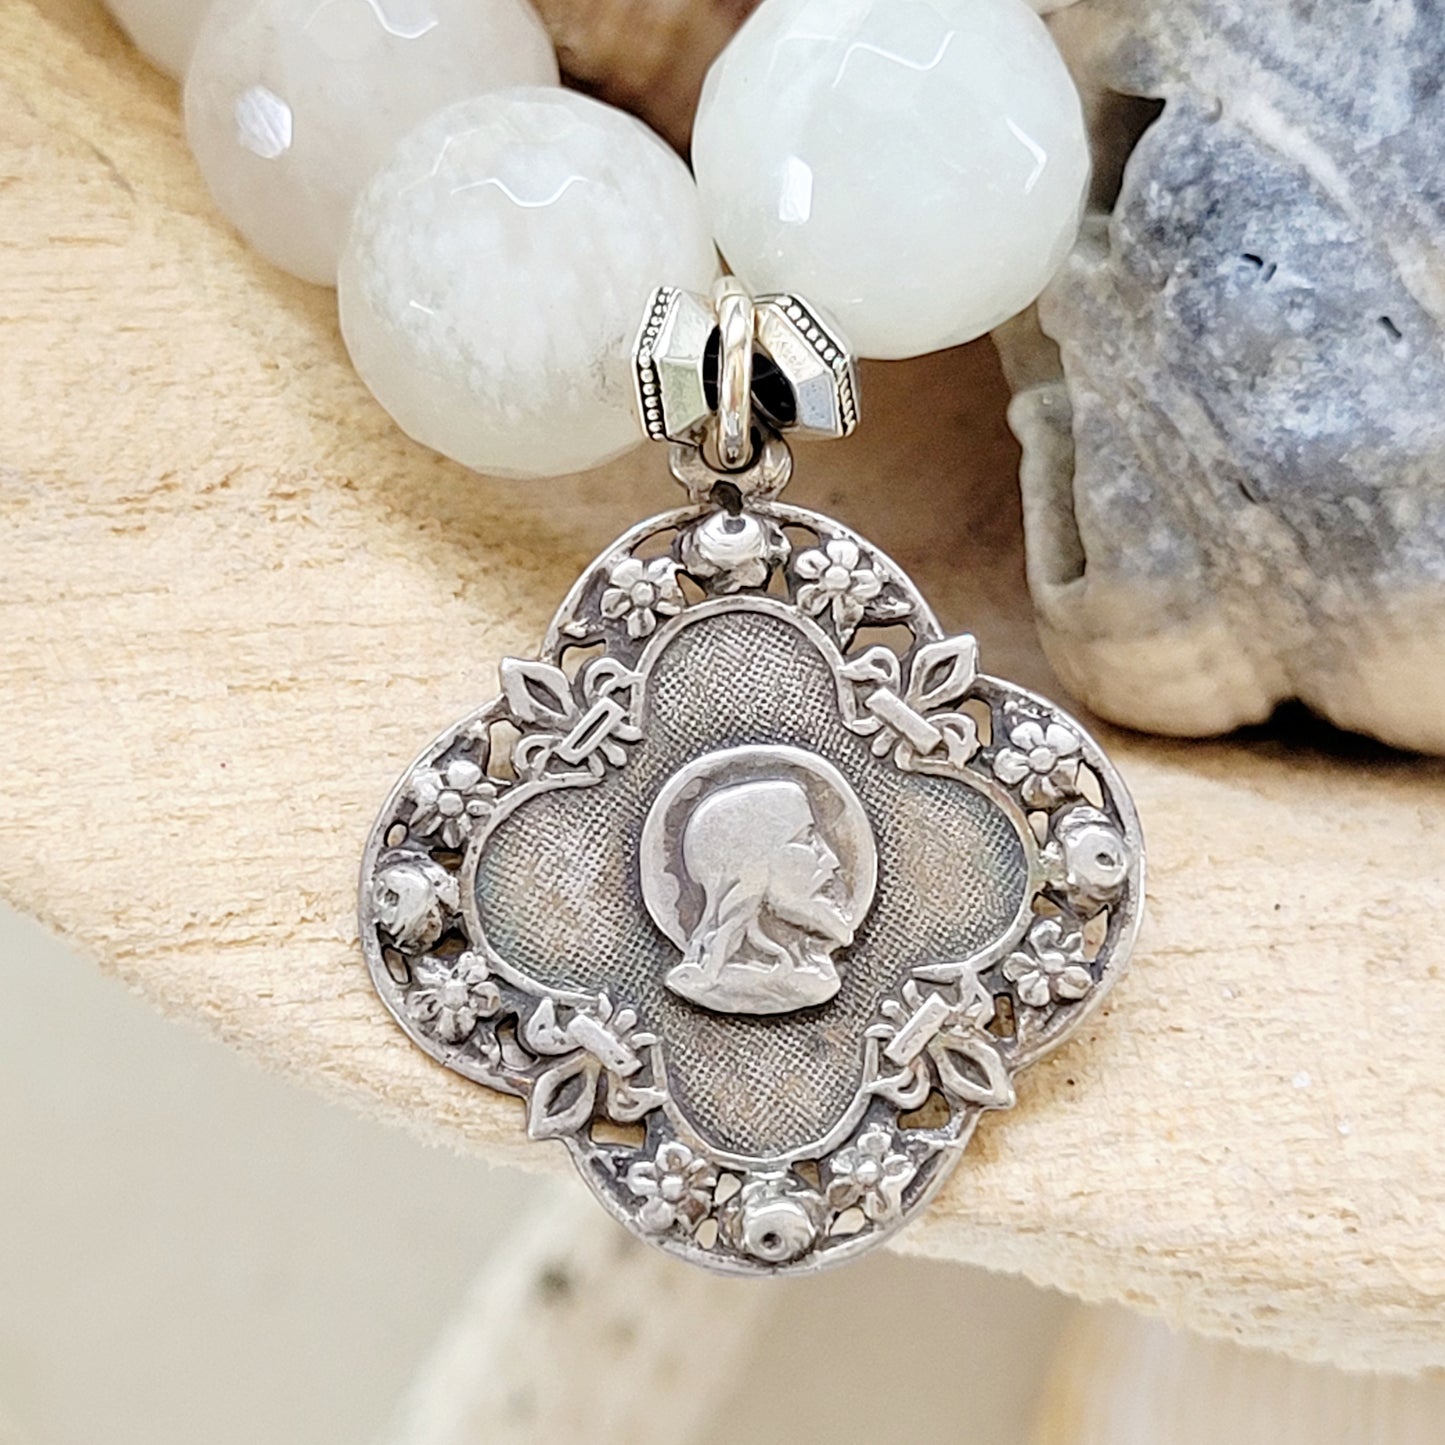 White Moonstone Faceted 12mm Beaded Bracelet w/ Art Nouveau Silver Medal of The Face of Jesus - Afterlife Jewelry Designs